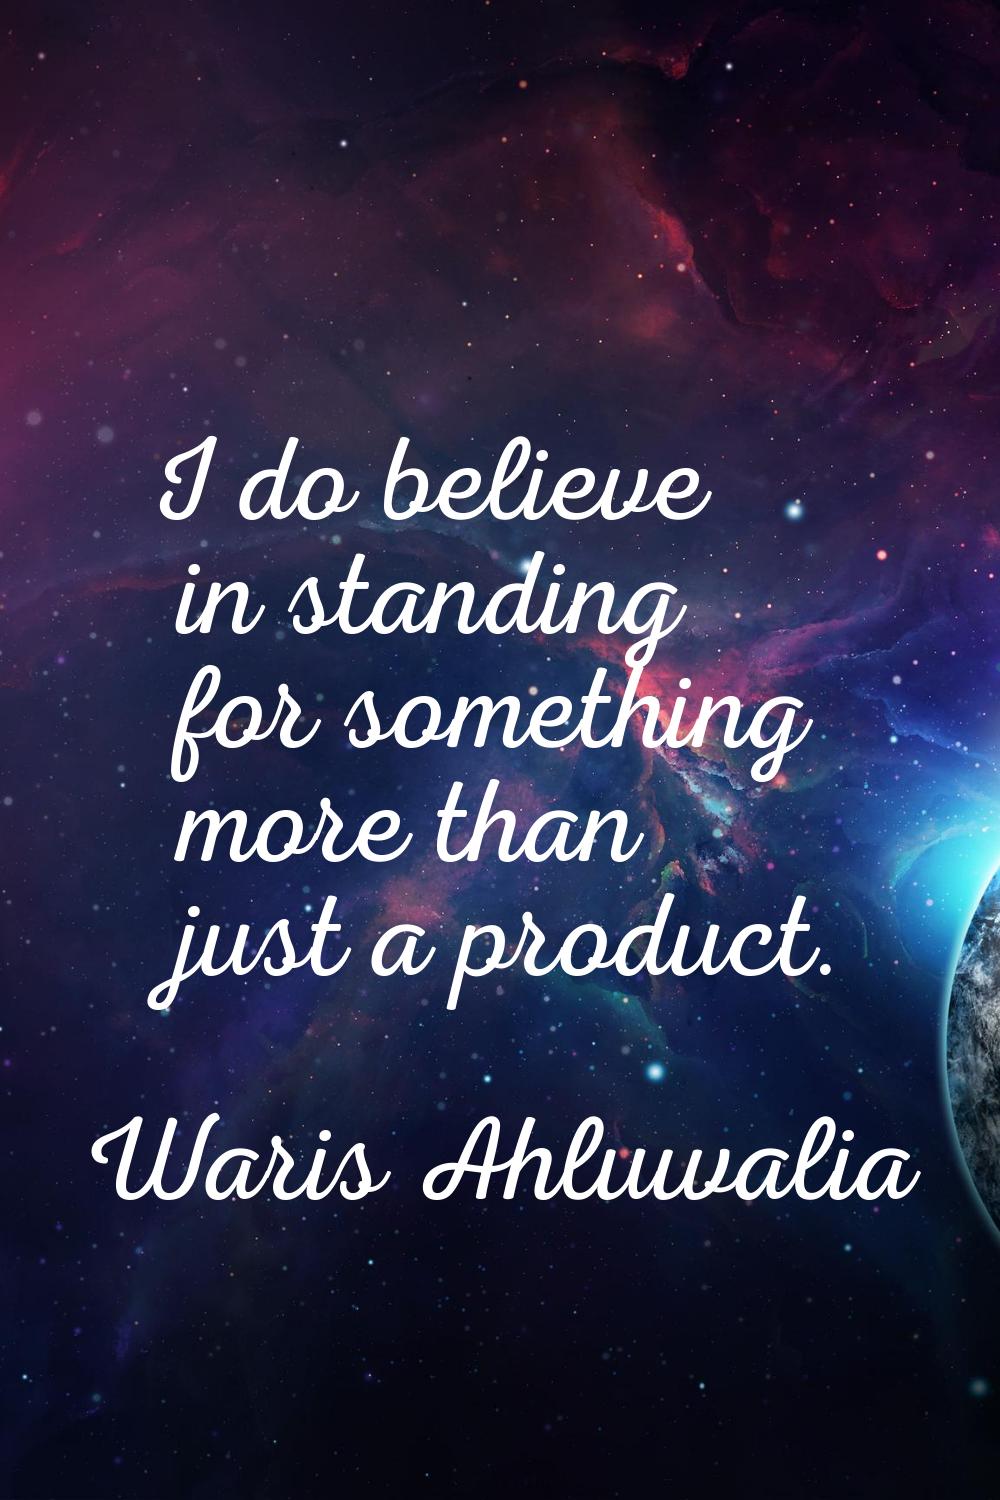 I do believe in standing for something more than just a product.